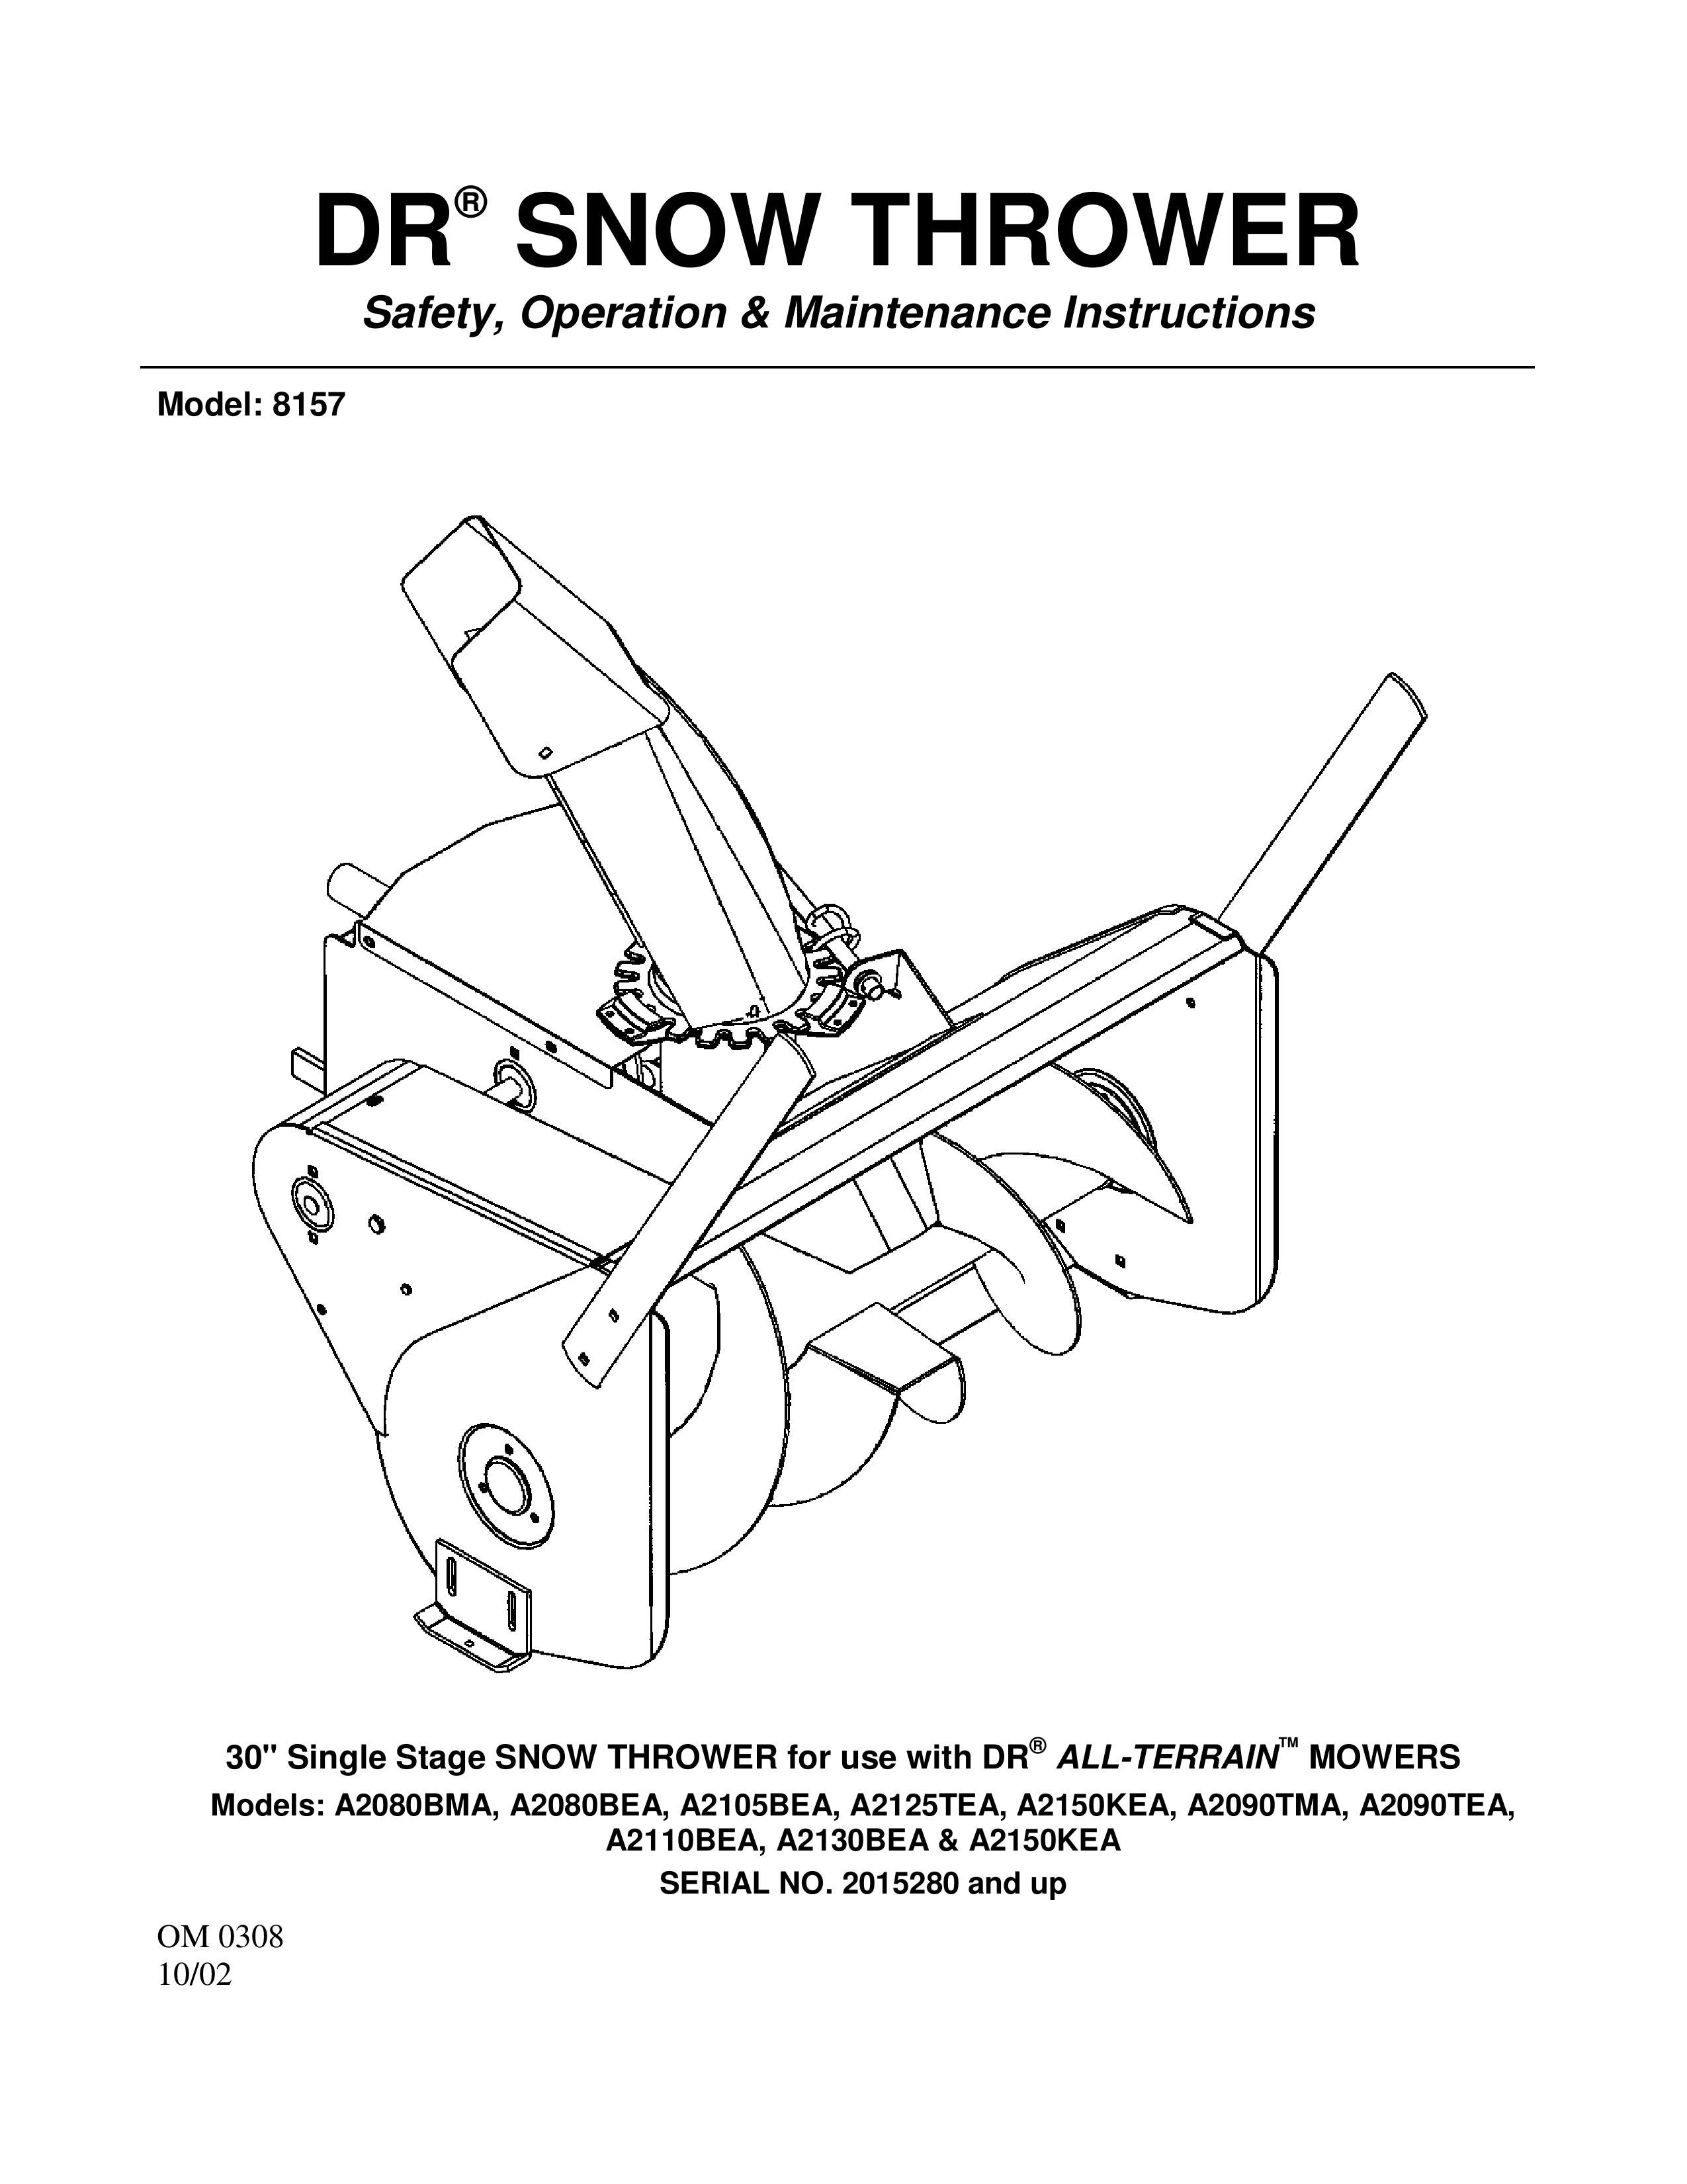 Country Home Products A2110BEA Snow Blower User Manual